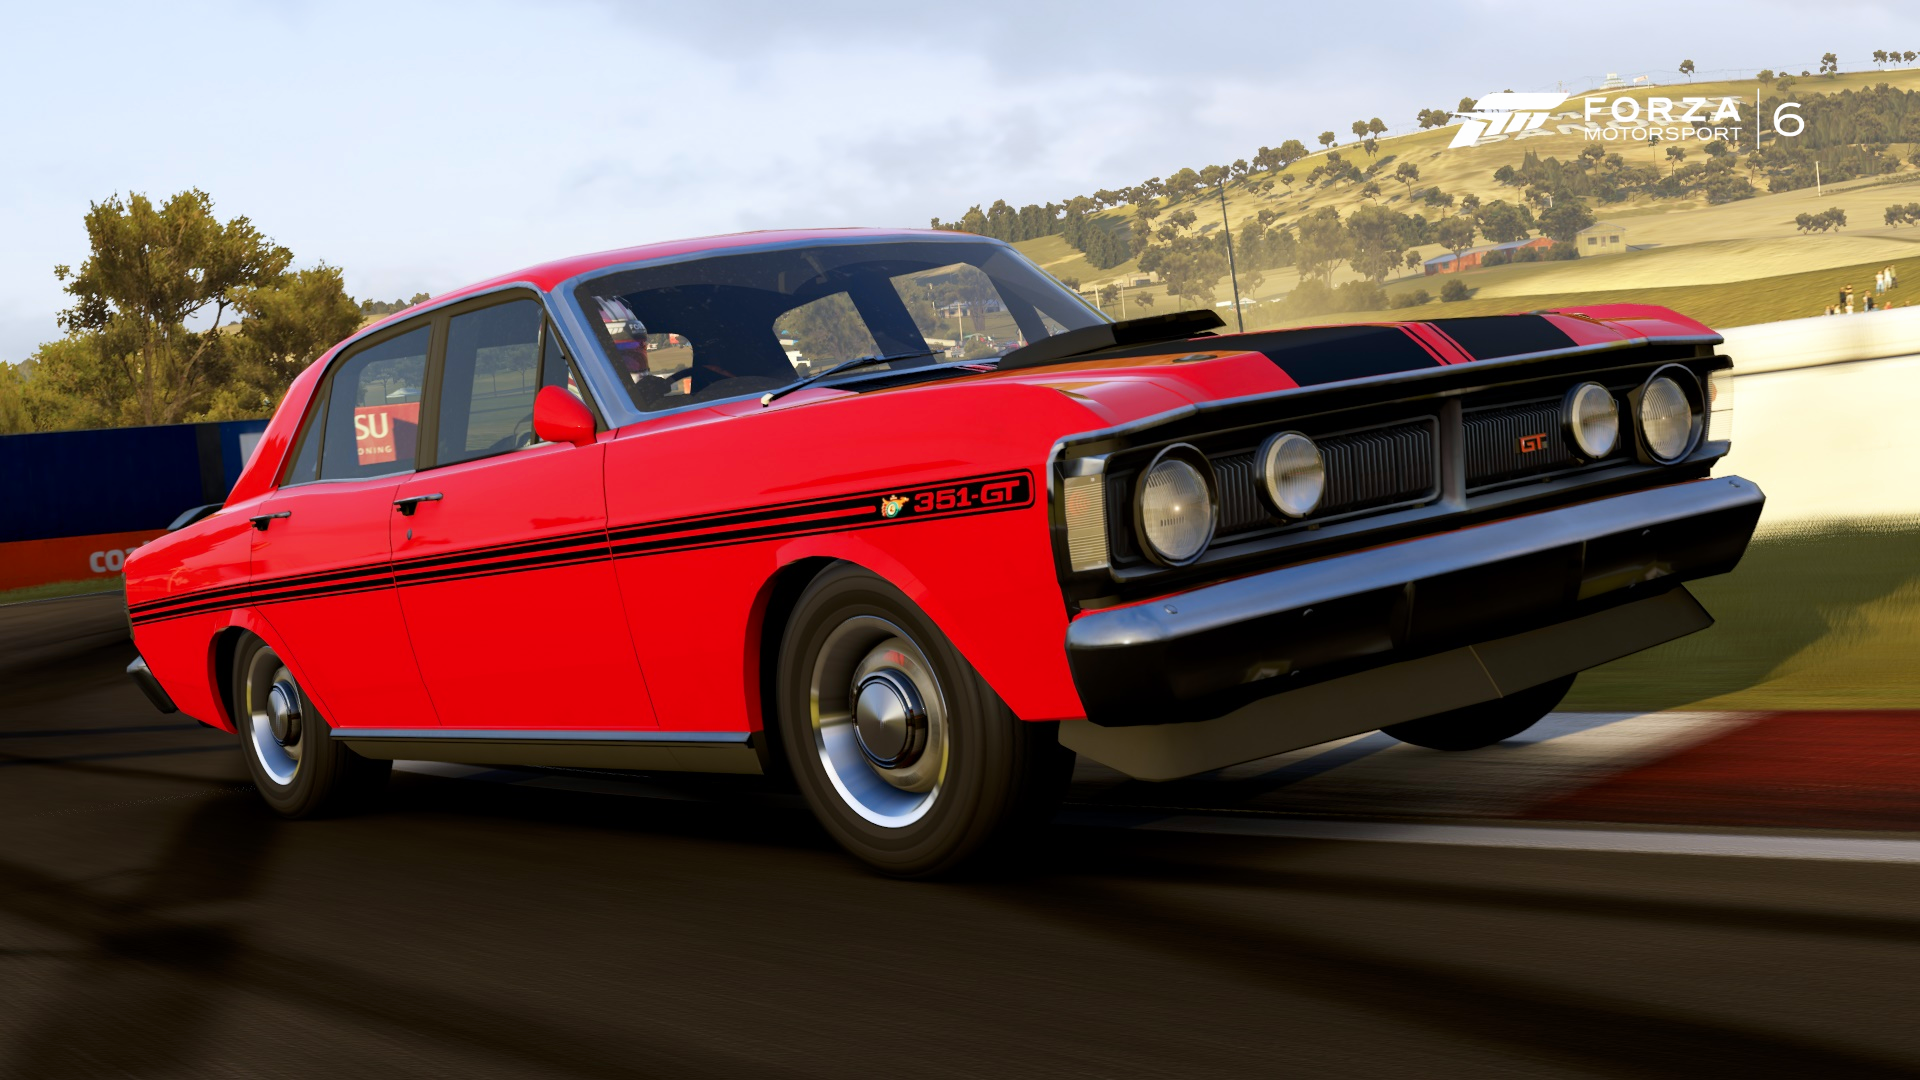 Ford Falcon GTHO Spotted in Forza Motorsport 6; Set For Horizon Inclusion?